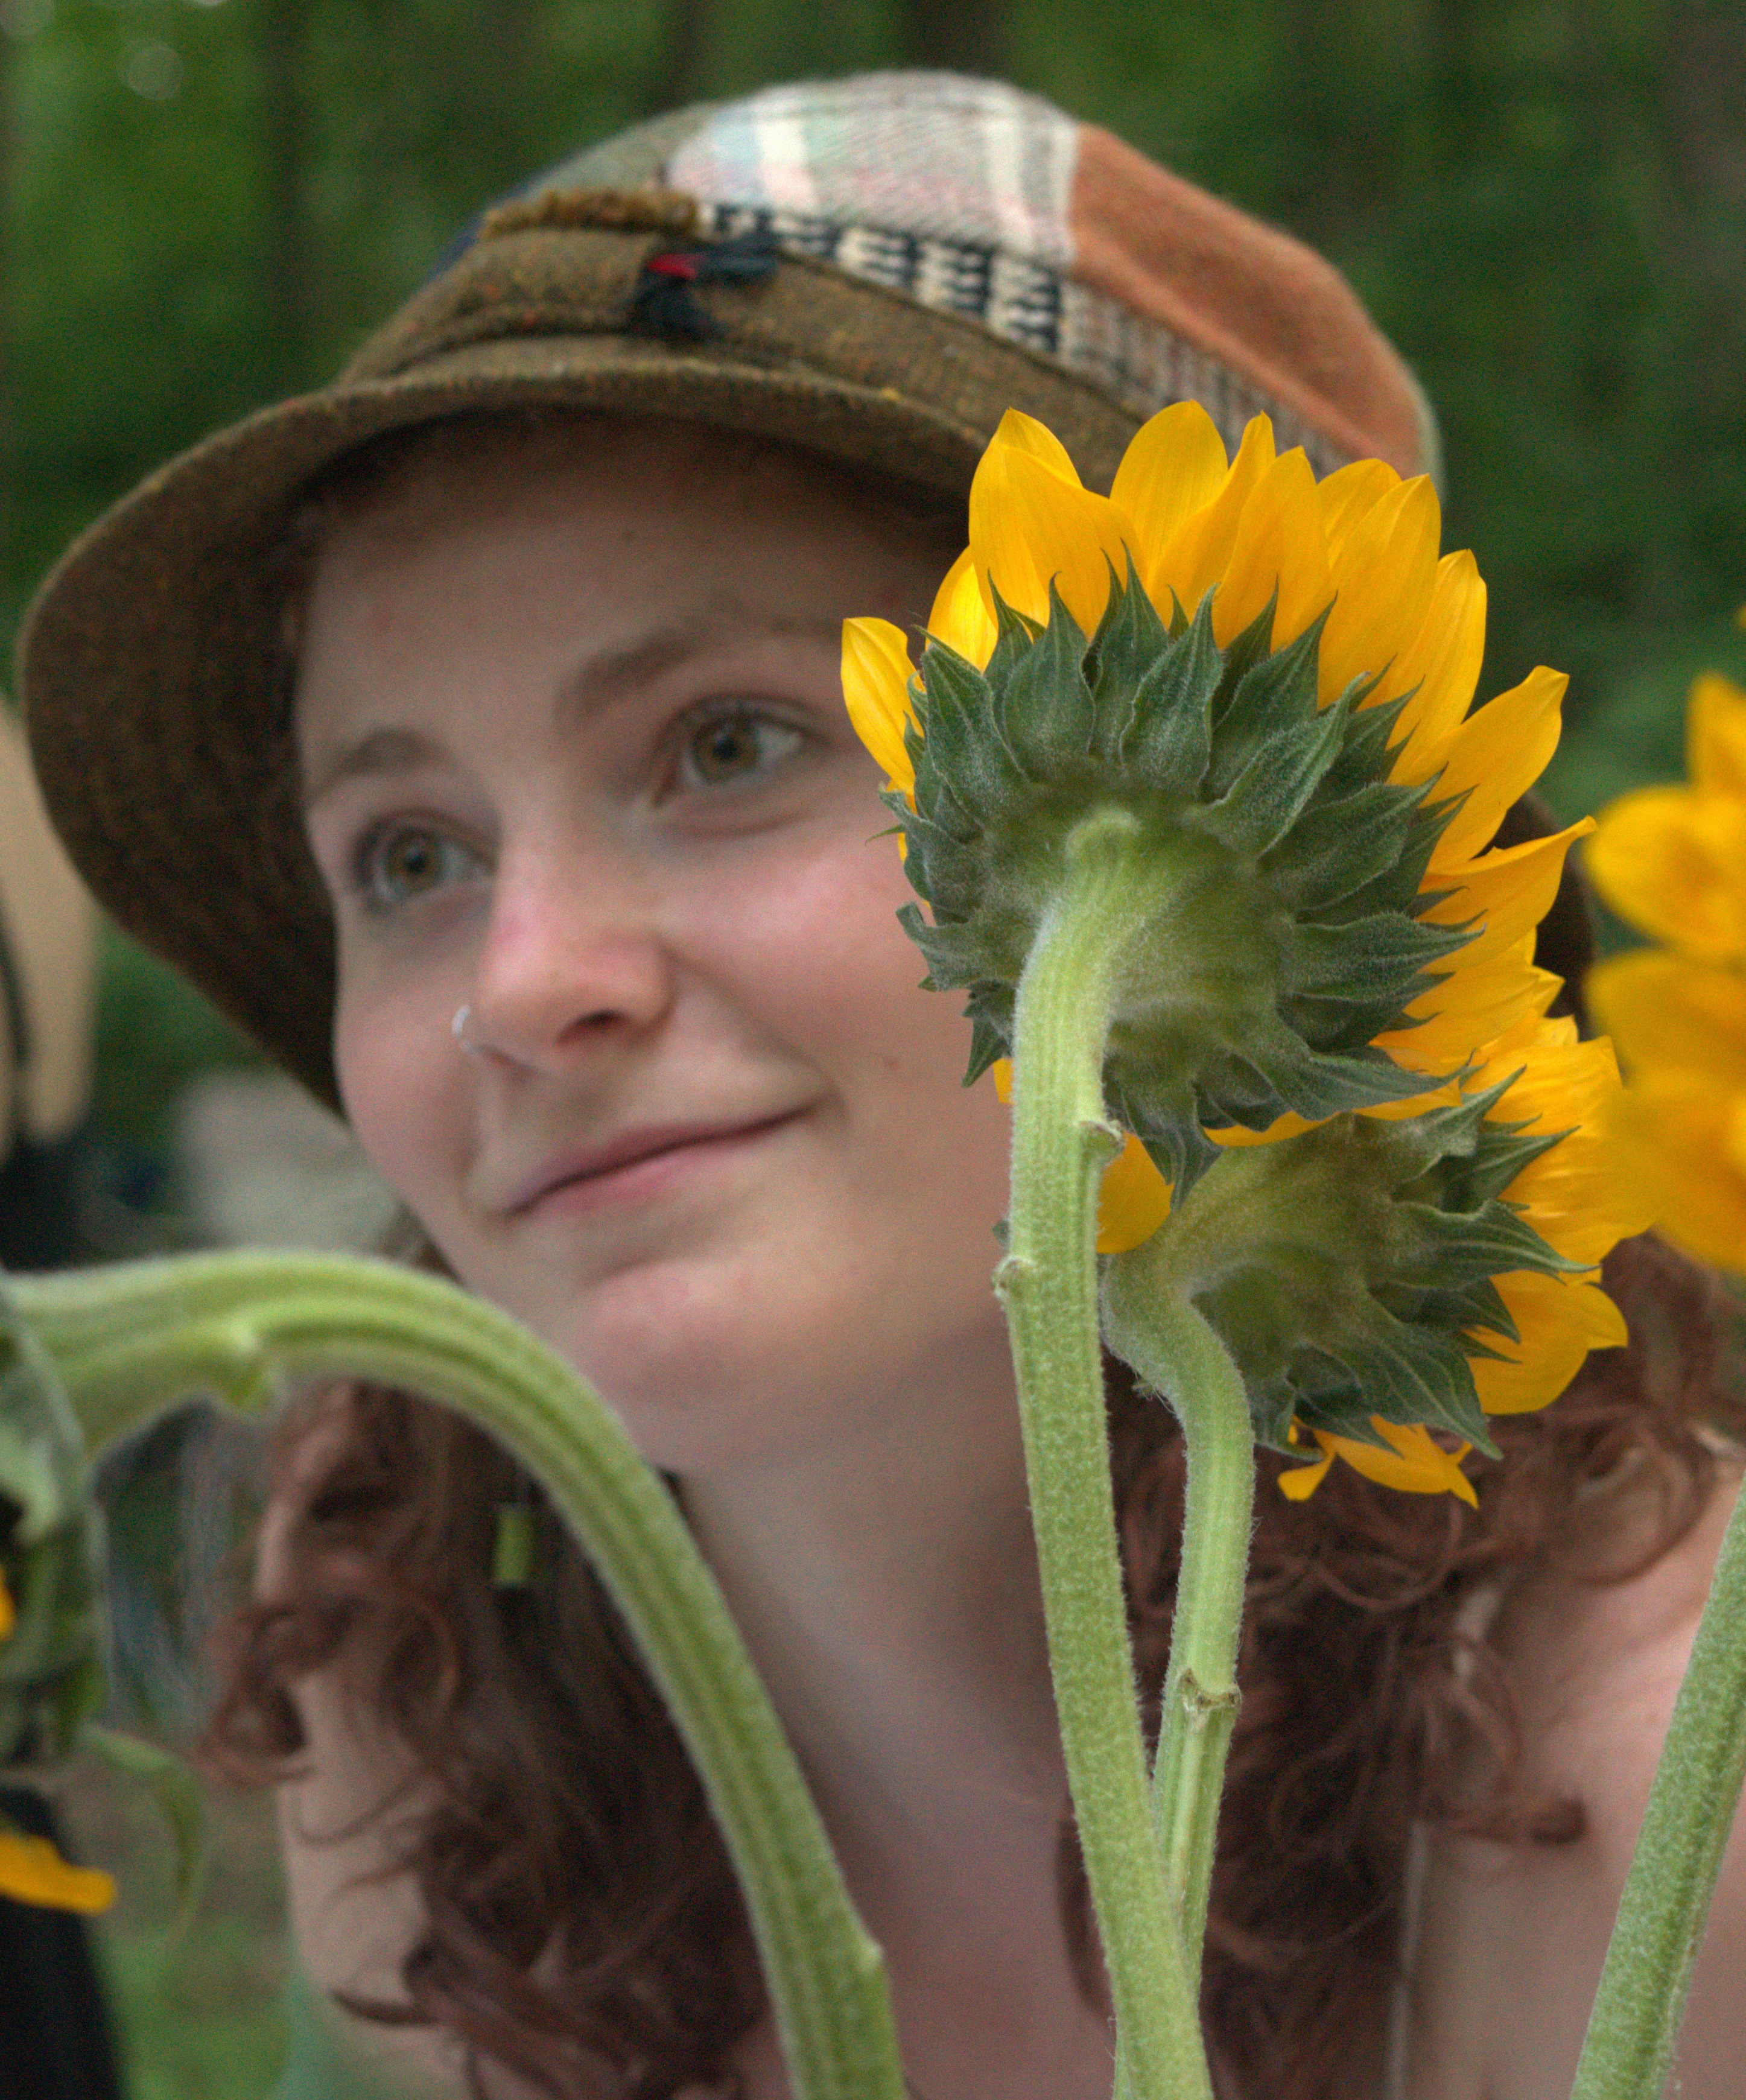 Photo of Nissa with sunflowers around her face